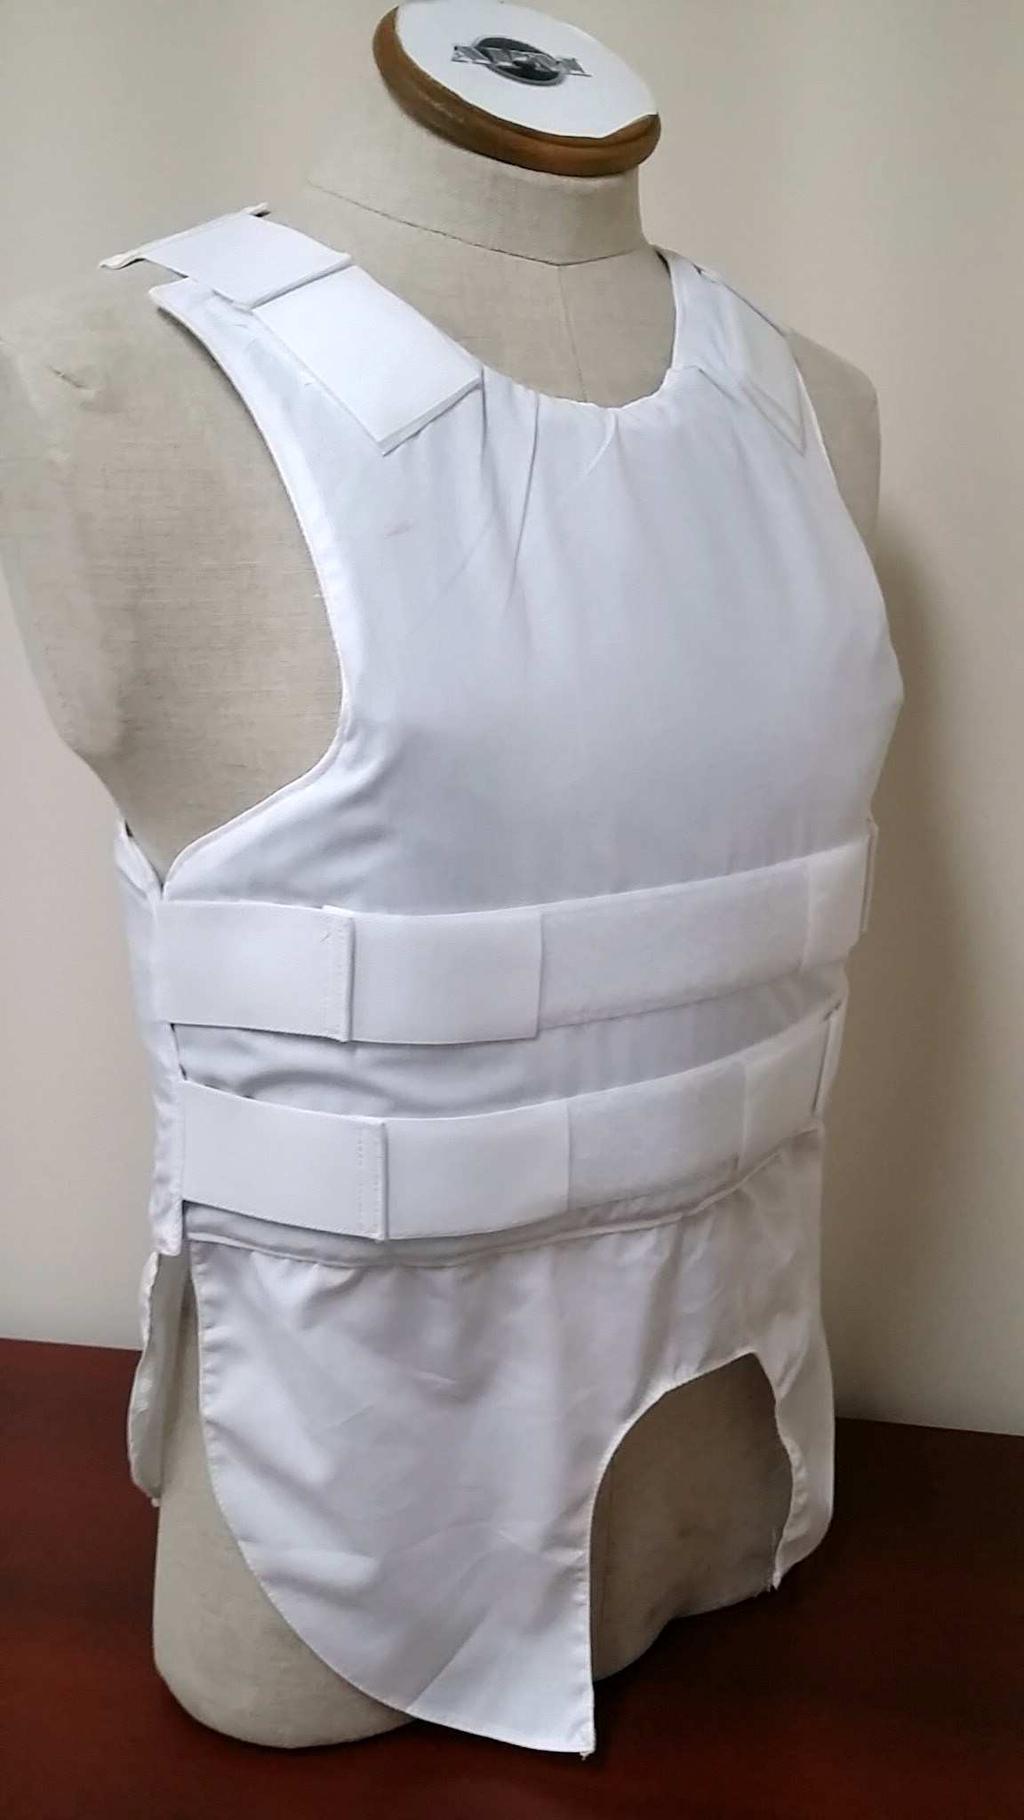 M/ BODY ARMOUR VESTS NIJ PROTECTION: PROTECTION: IIIA-0101,06 357 SIG FMJ FN 125gr,44 Magnum SJHP 240gr FRONT VIEW MATERIAL Interne 8500V3 Veste pare-balles Polyestère/cotton *White internal